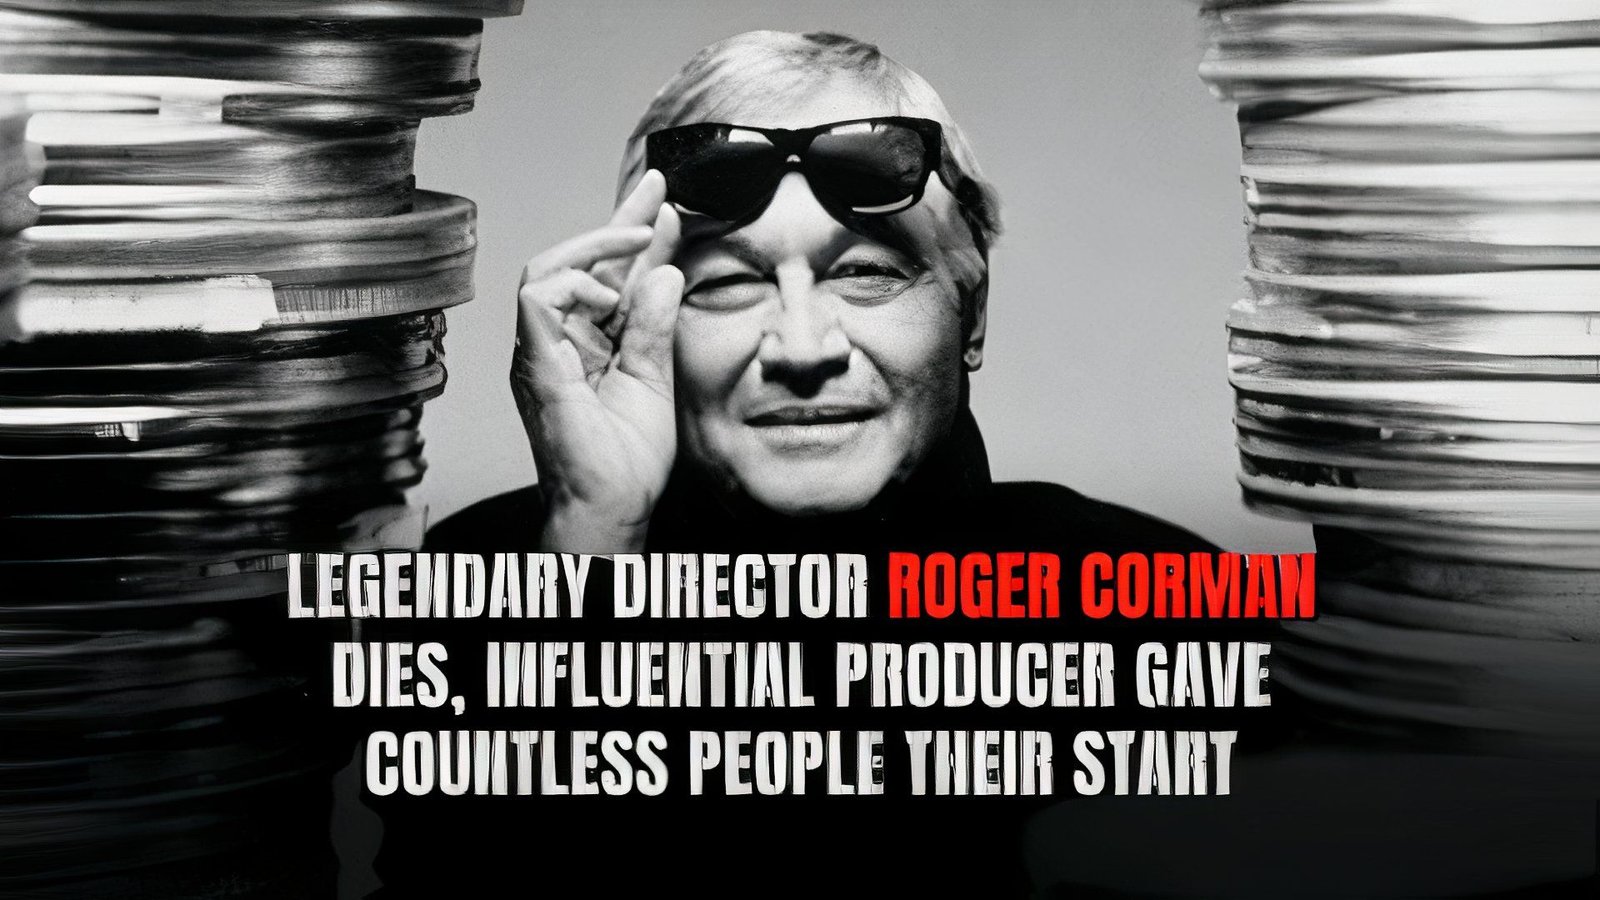 Legendary Director Roger Corman Dies, Influential Producer Gave Countless People Their Start